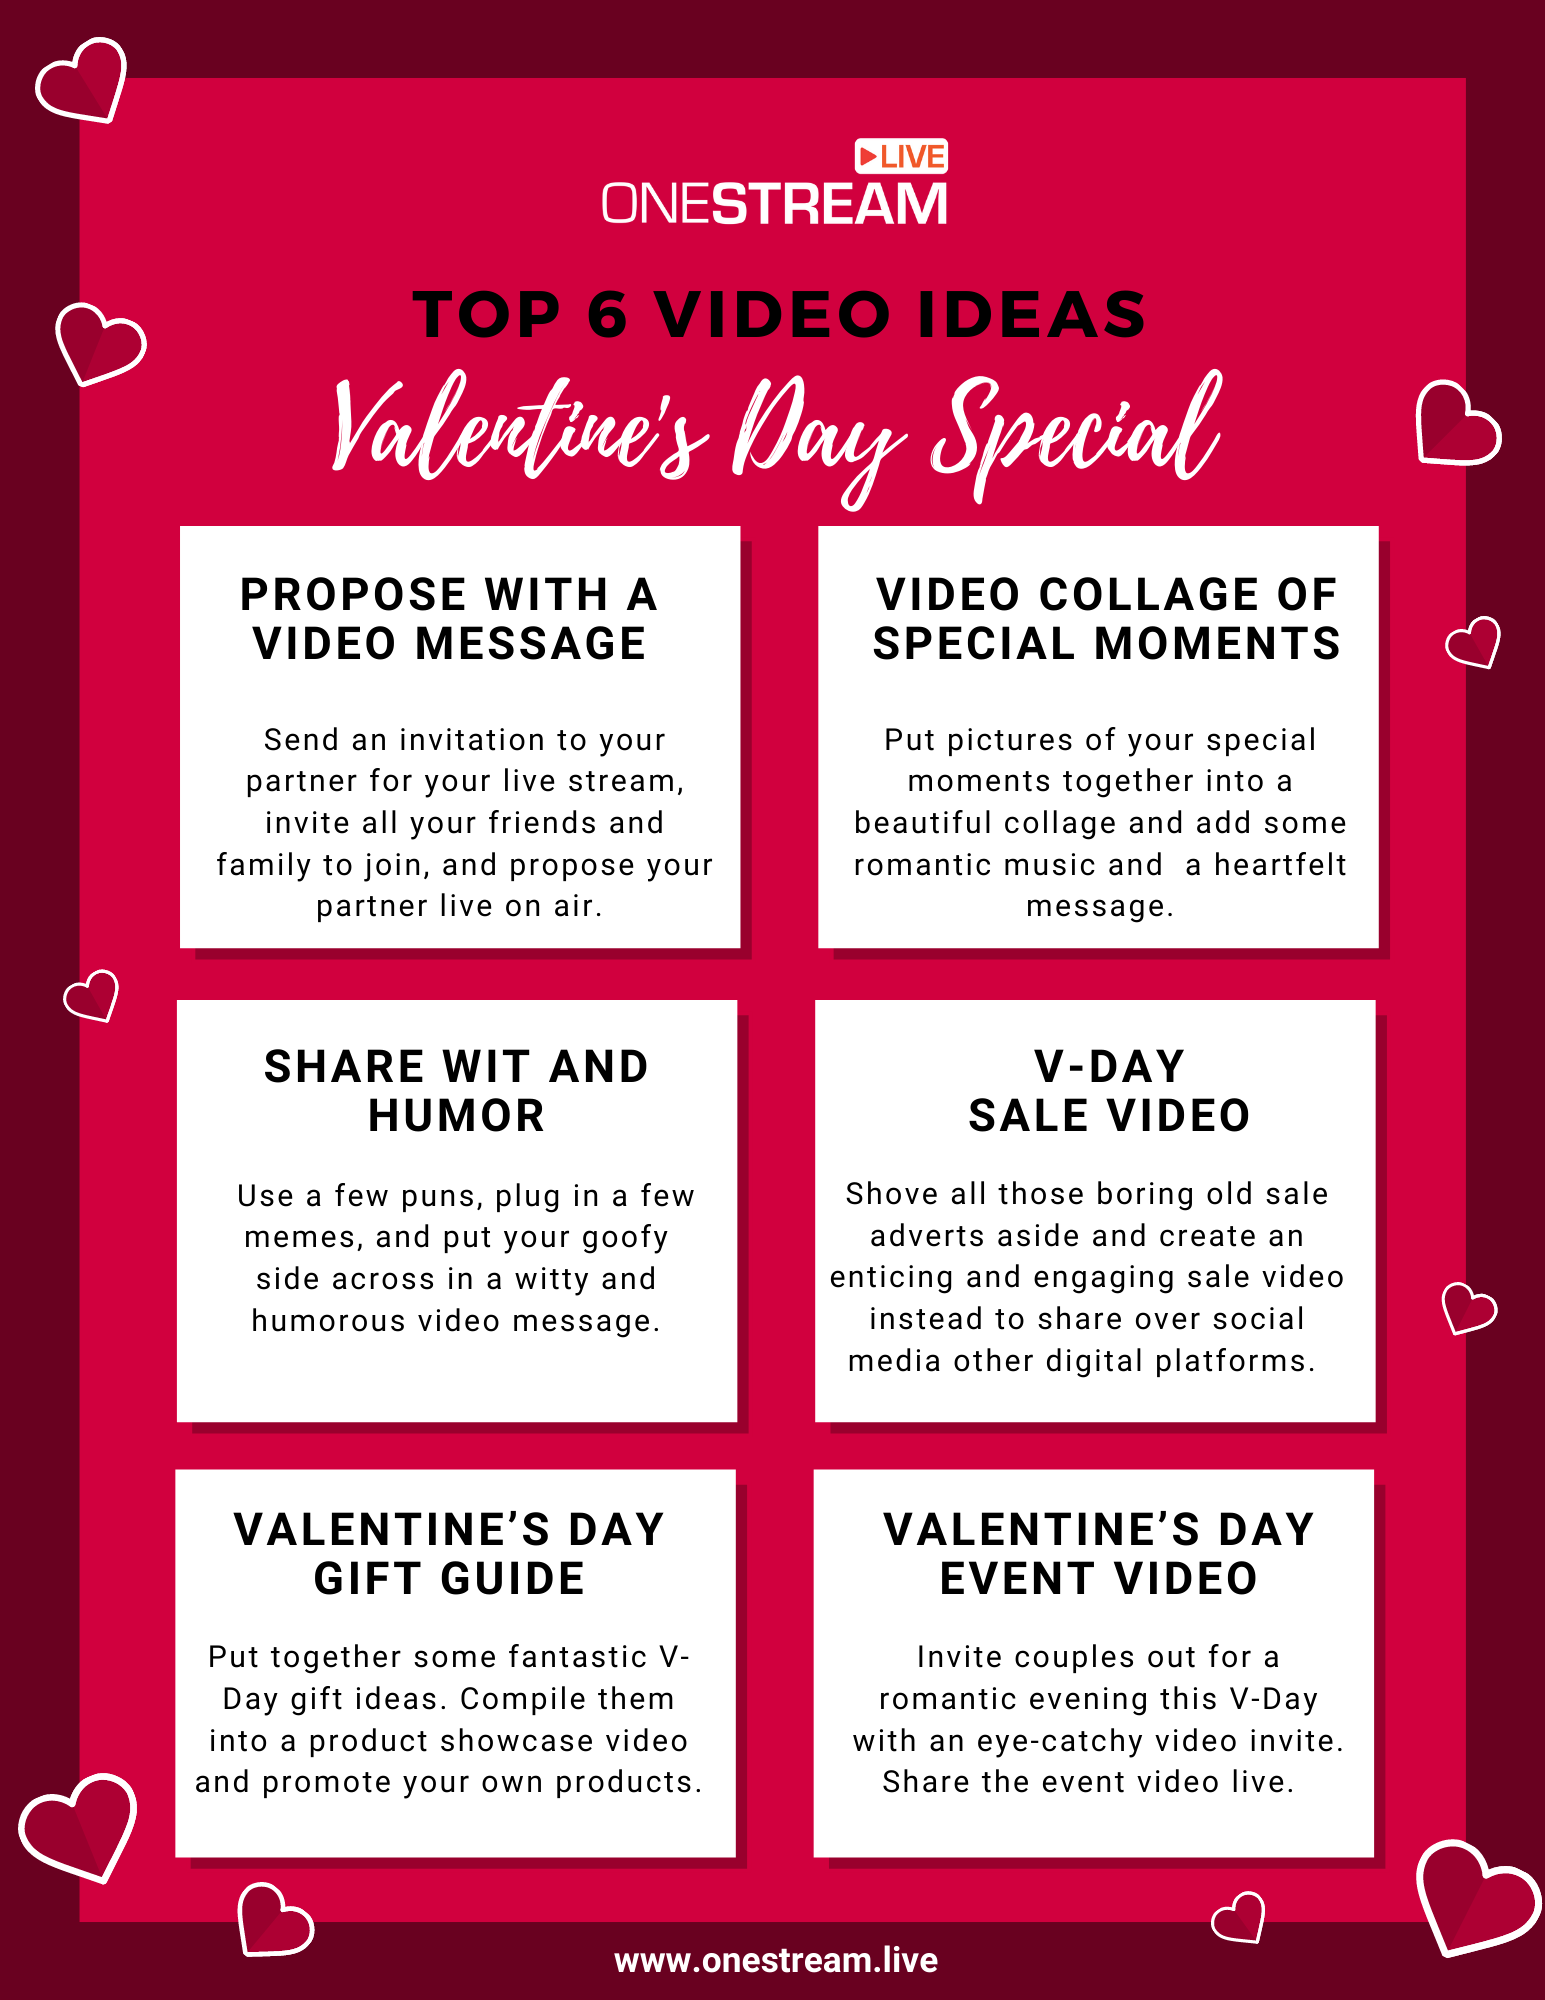 Video ideas for Valentines Day